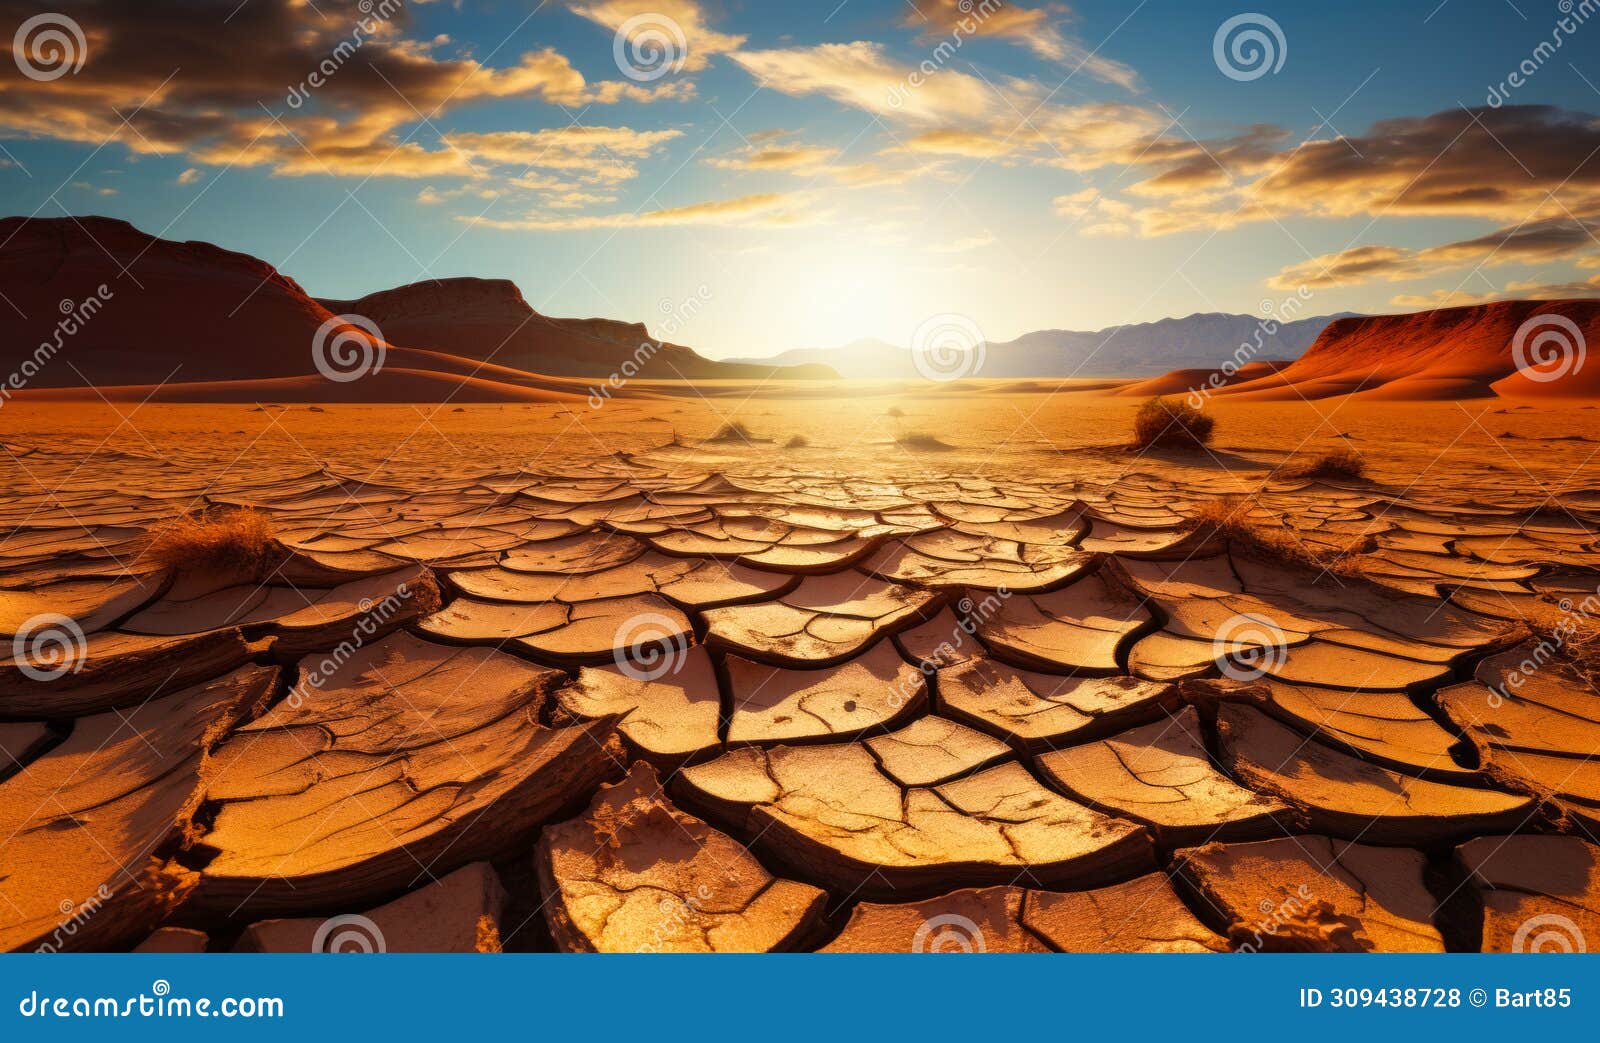 expansive desert landscape with cracked earth foreground leading to rolling sand dunes under a golden sunrise, izing aridity